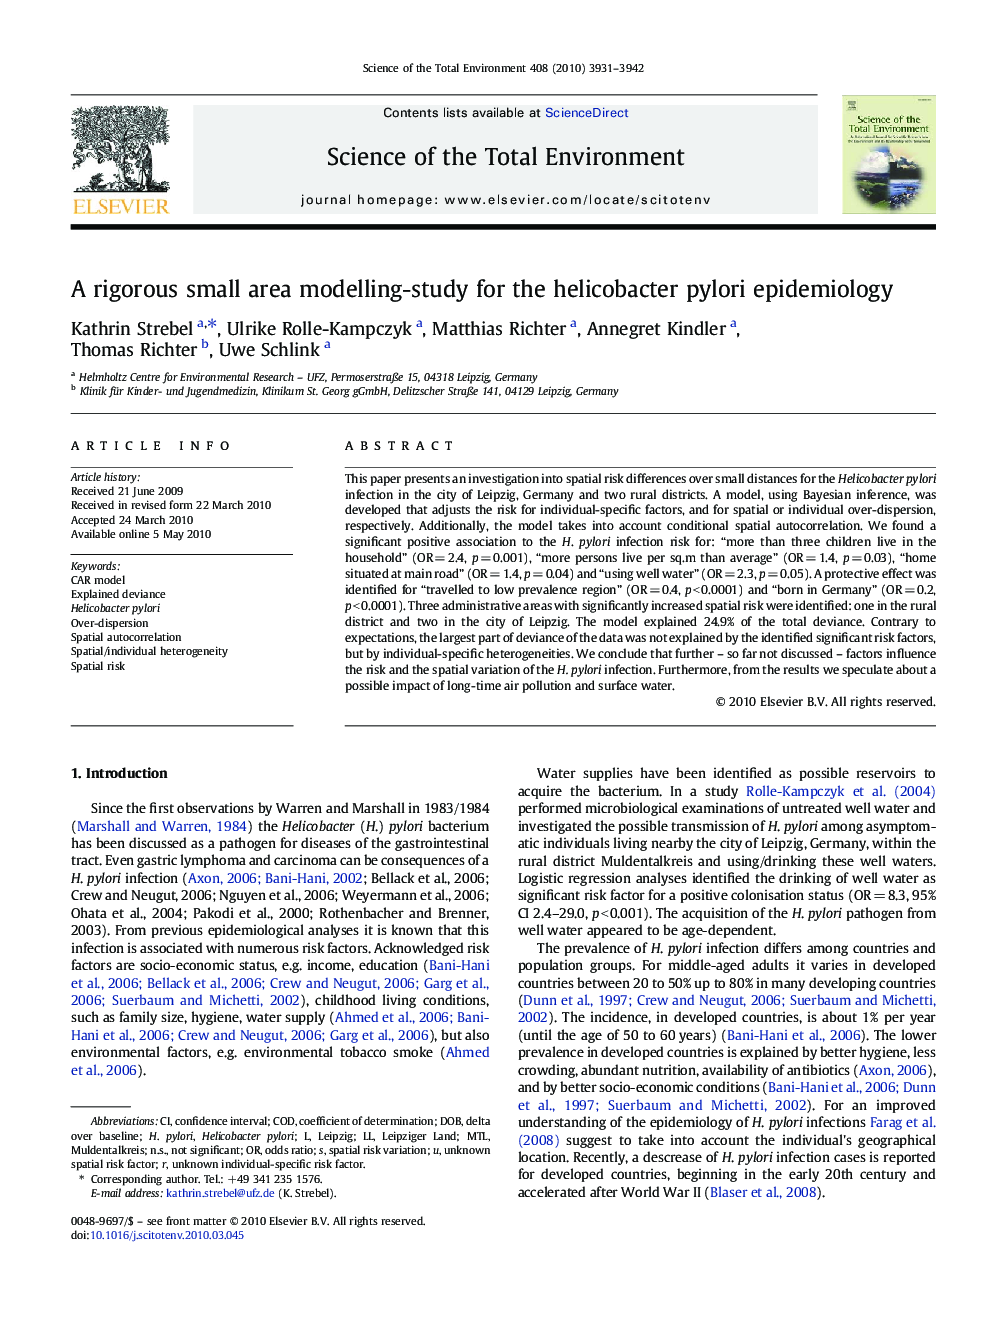 A rigorous small area modelling-study for the helicobacter pylori epidemiology